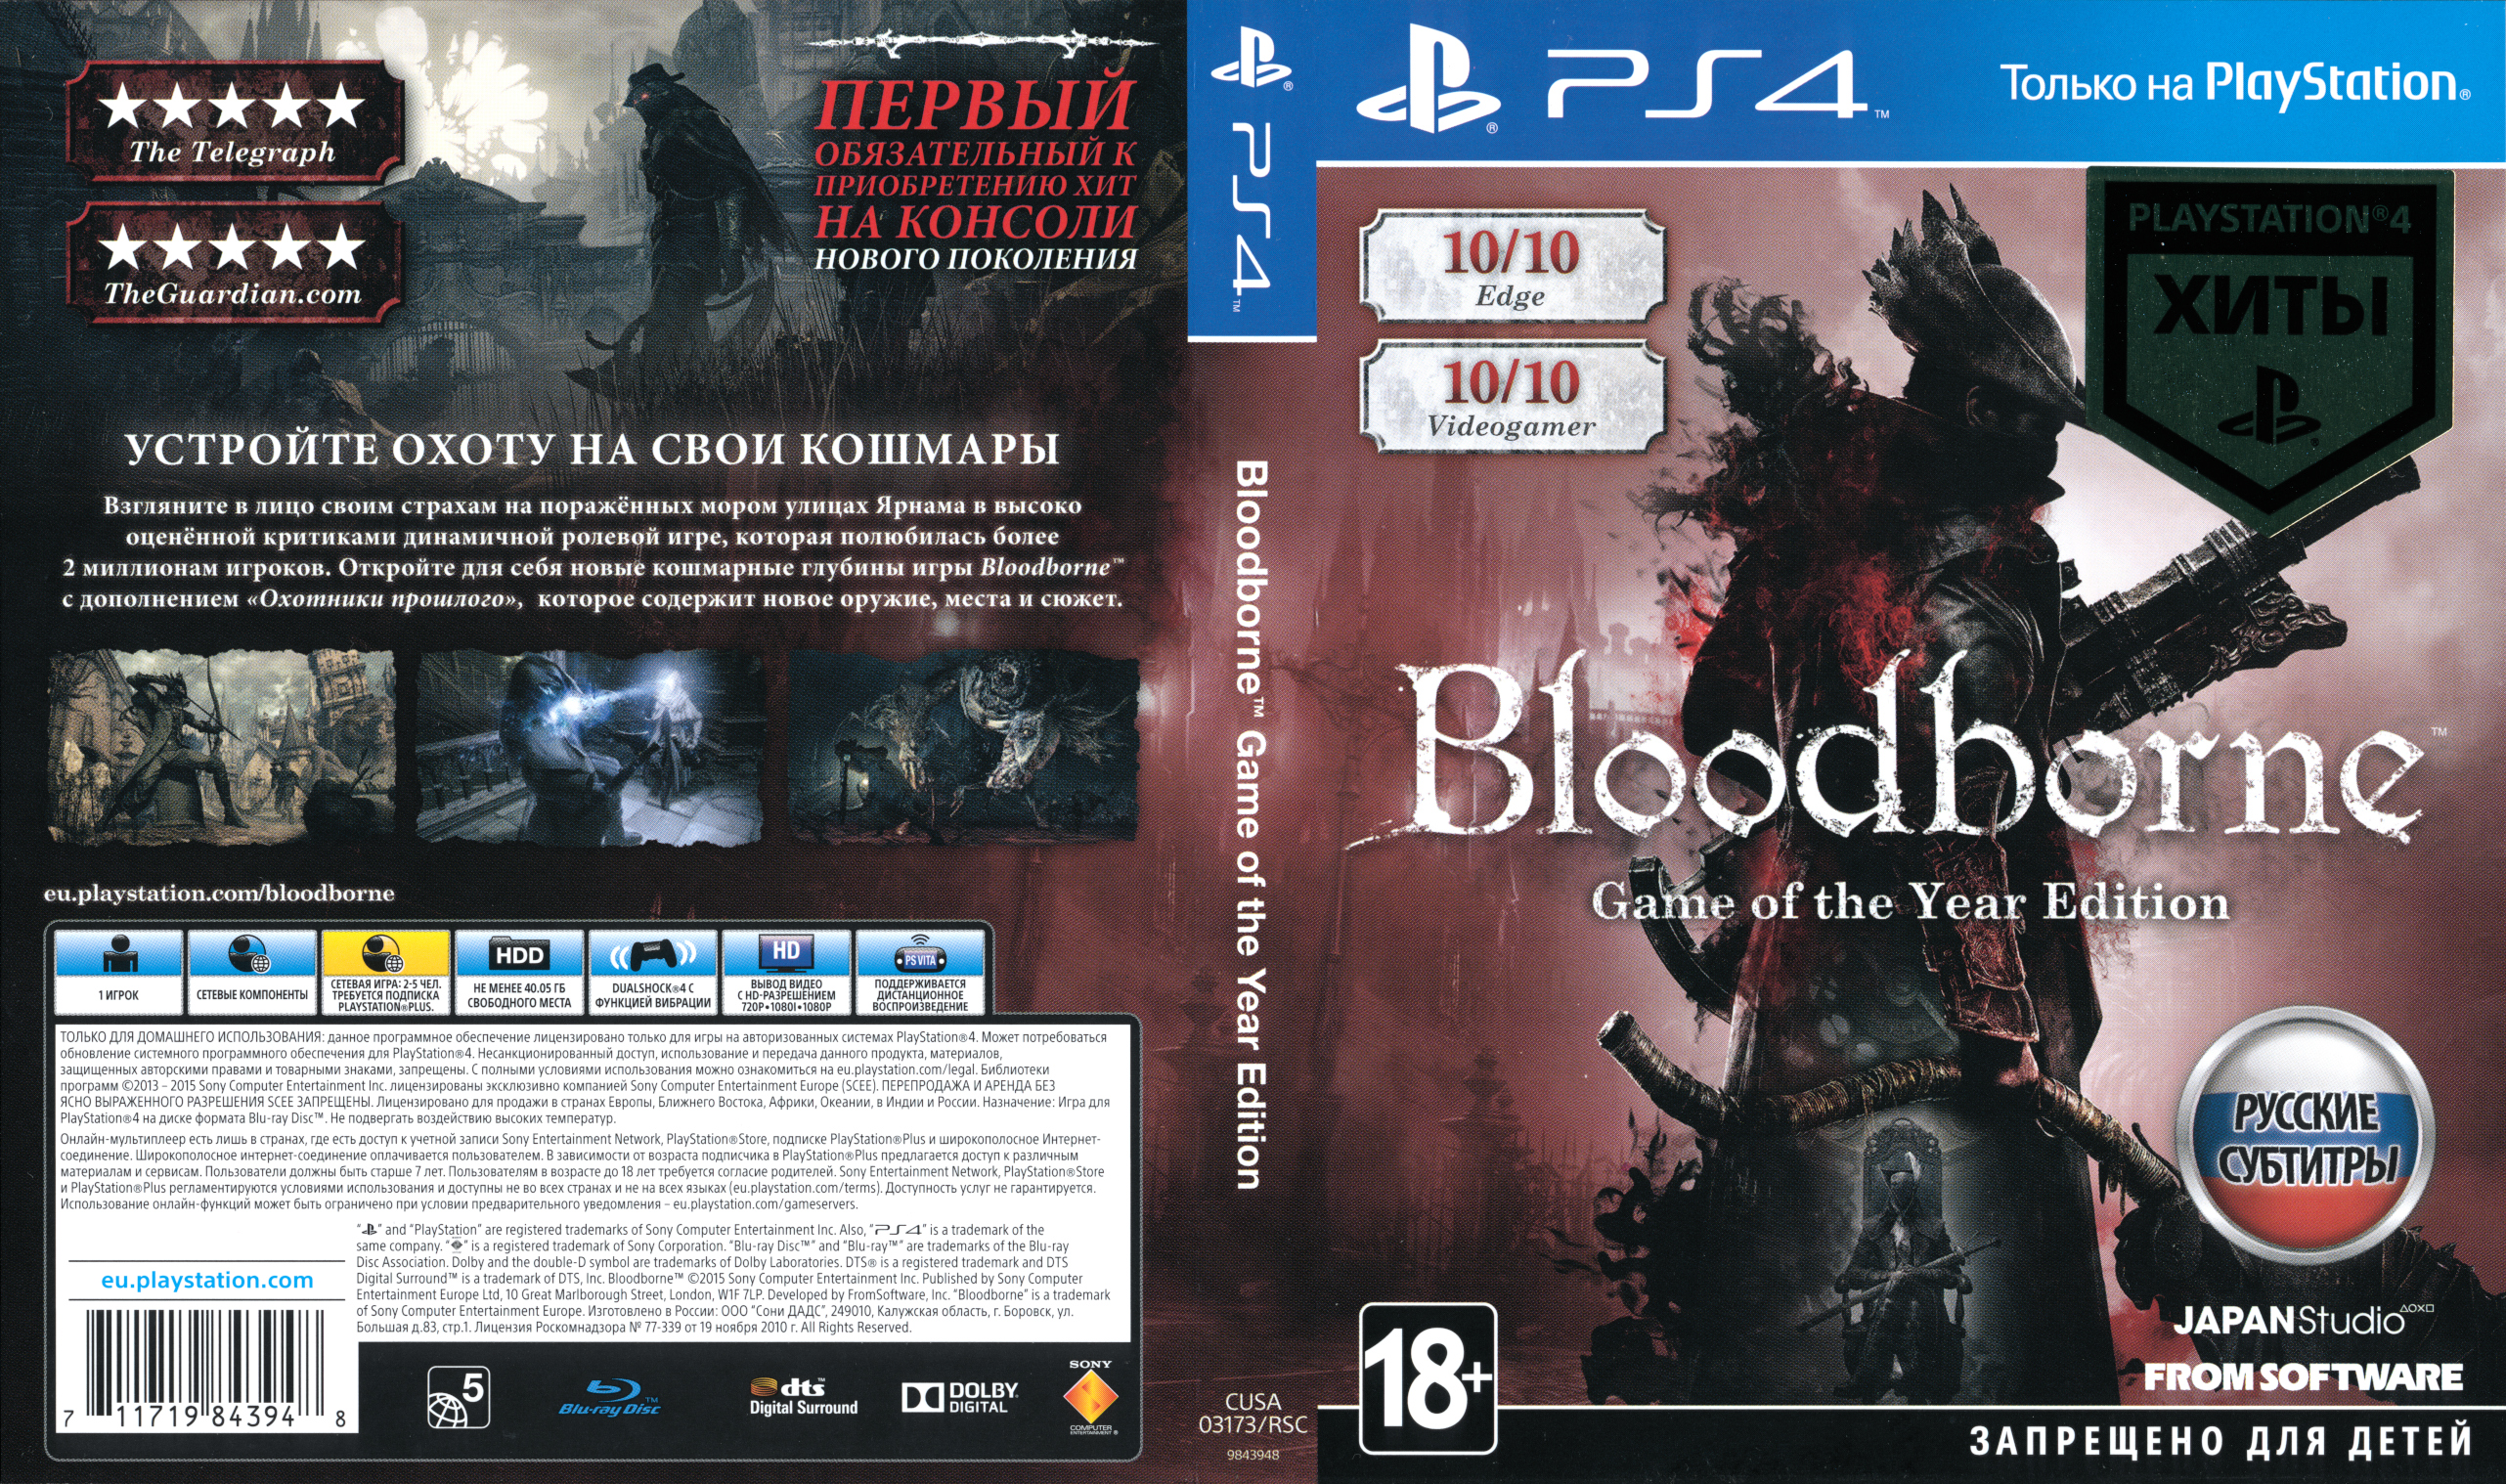 Bloodborne (Game of the Year Edition) PS4 CUSA-03173/RSC Russia